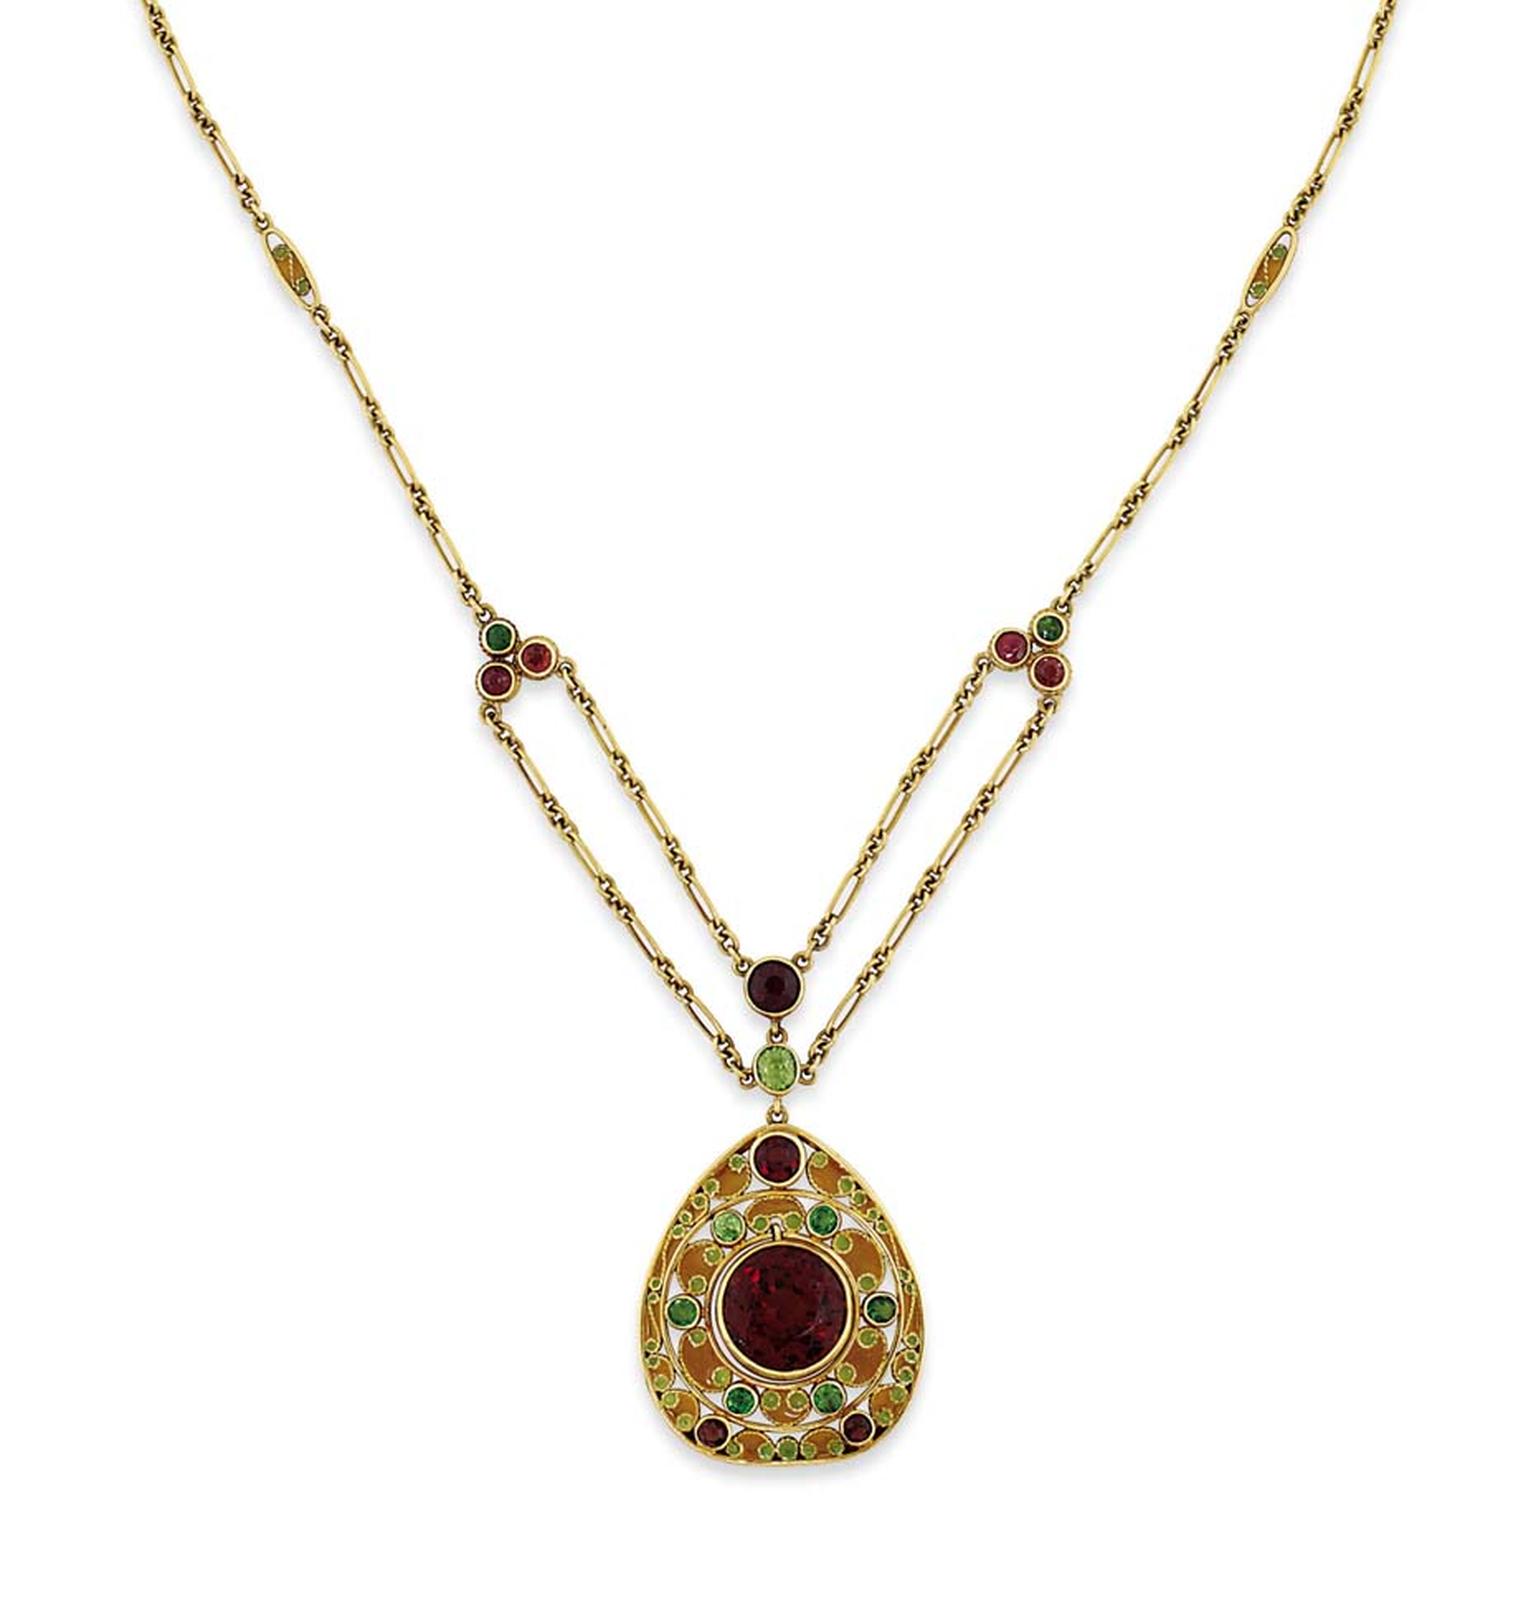 A charming late 19th century garnet and enamel pendant by Tiffany & Co. has a modest estimate but shows the variety of jewels on offer (estimate: £2,000-£3,000).